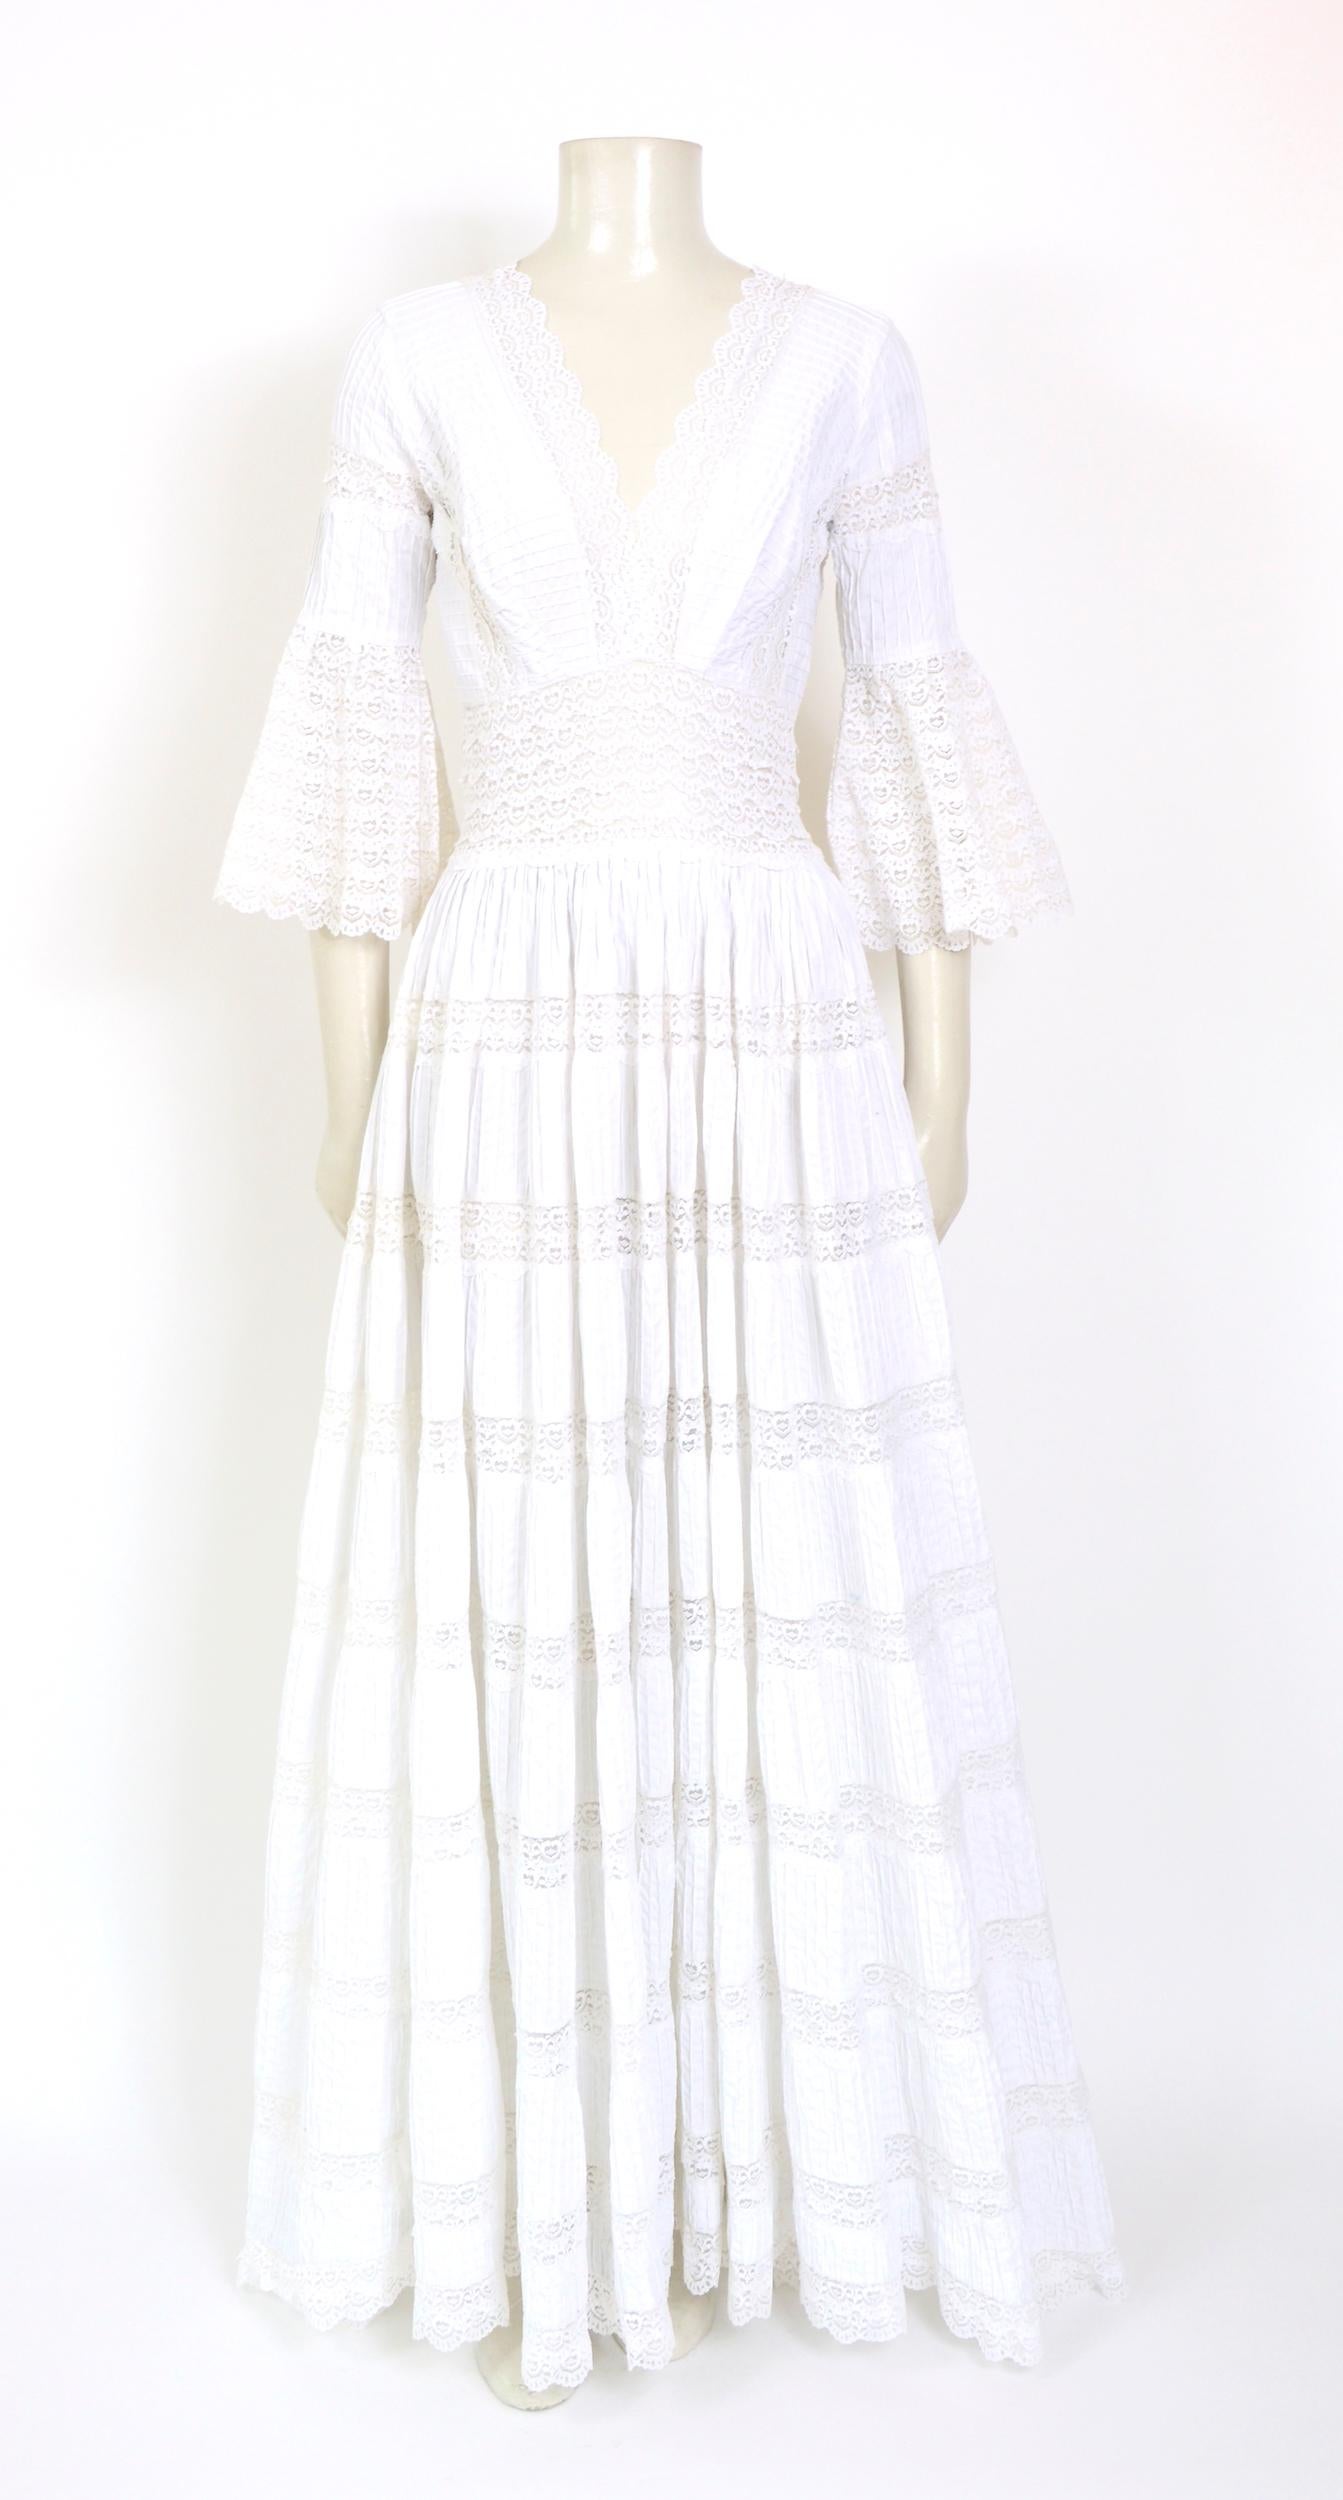 Vintage Mexican wedding white cotton and lace maxi boho dress.
Made in Mexico
Size 10
Measurements are taken flat: Ua to Ua 16,5inch 42cm(x2) - Waist 13inch/33cm(x2) - Hip free - Total Length 60inch/162cm